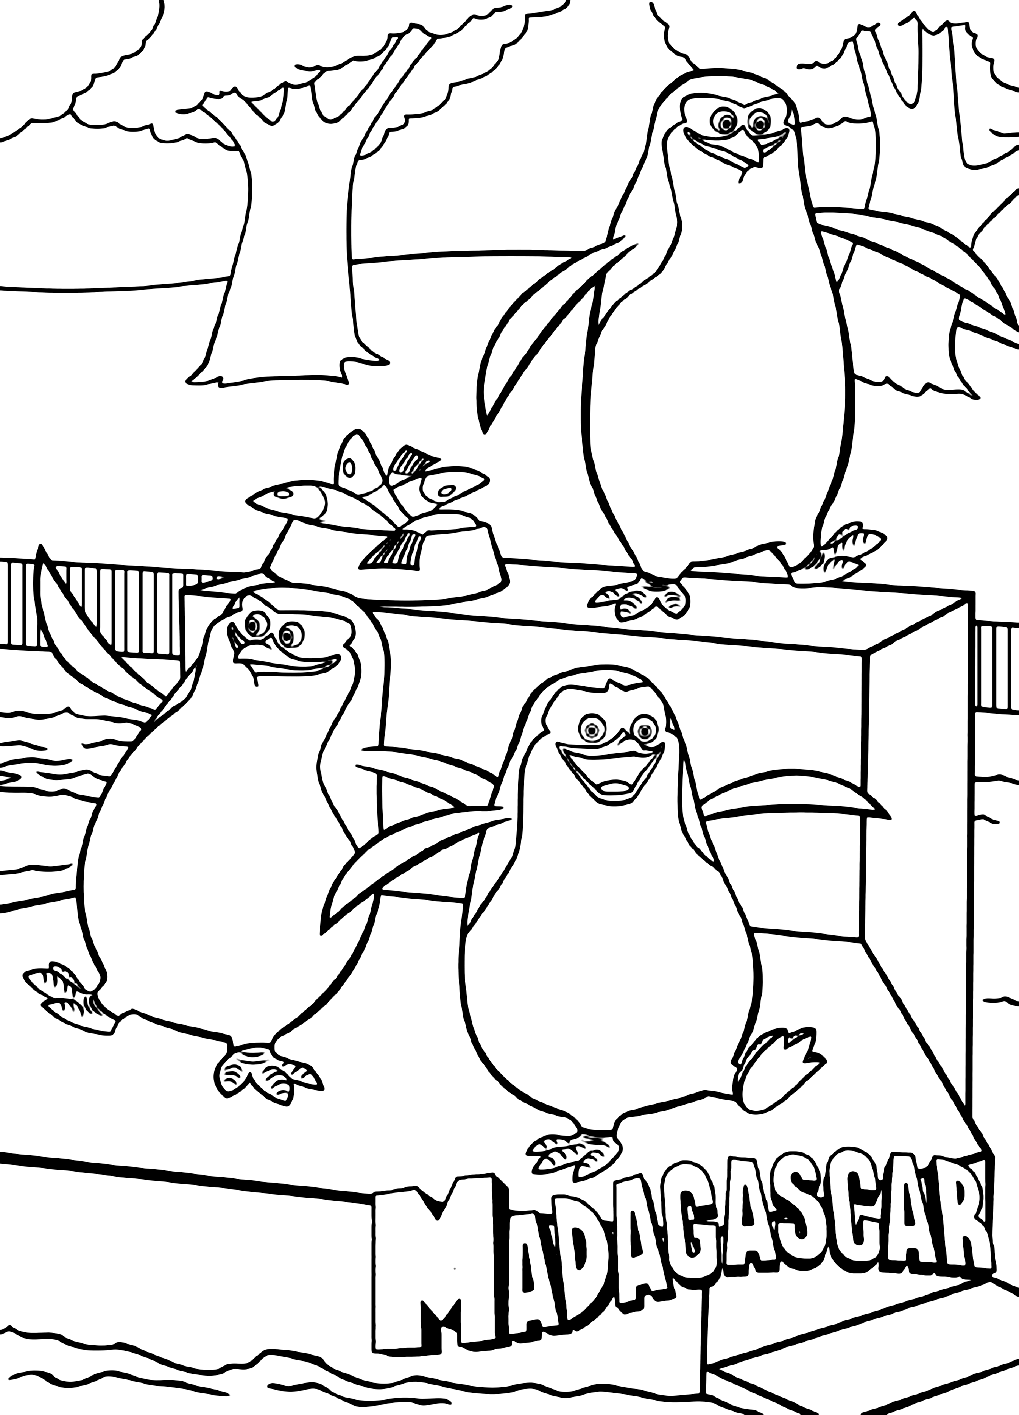 Penguins of Madagascar Characters Coloring Page